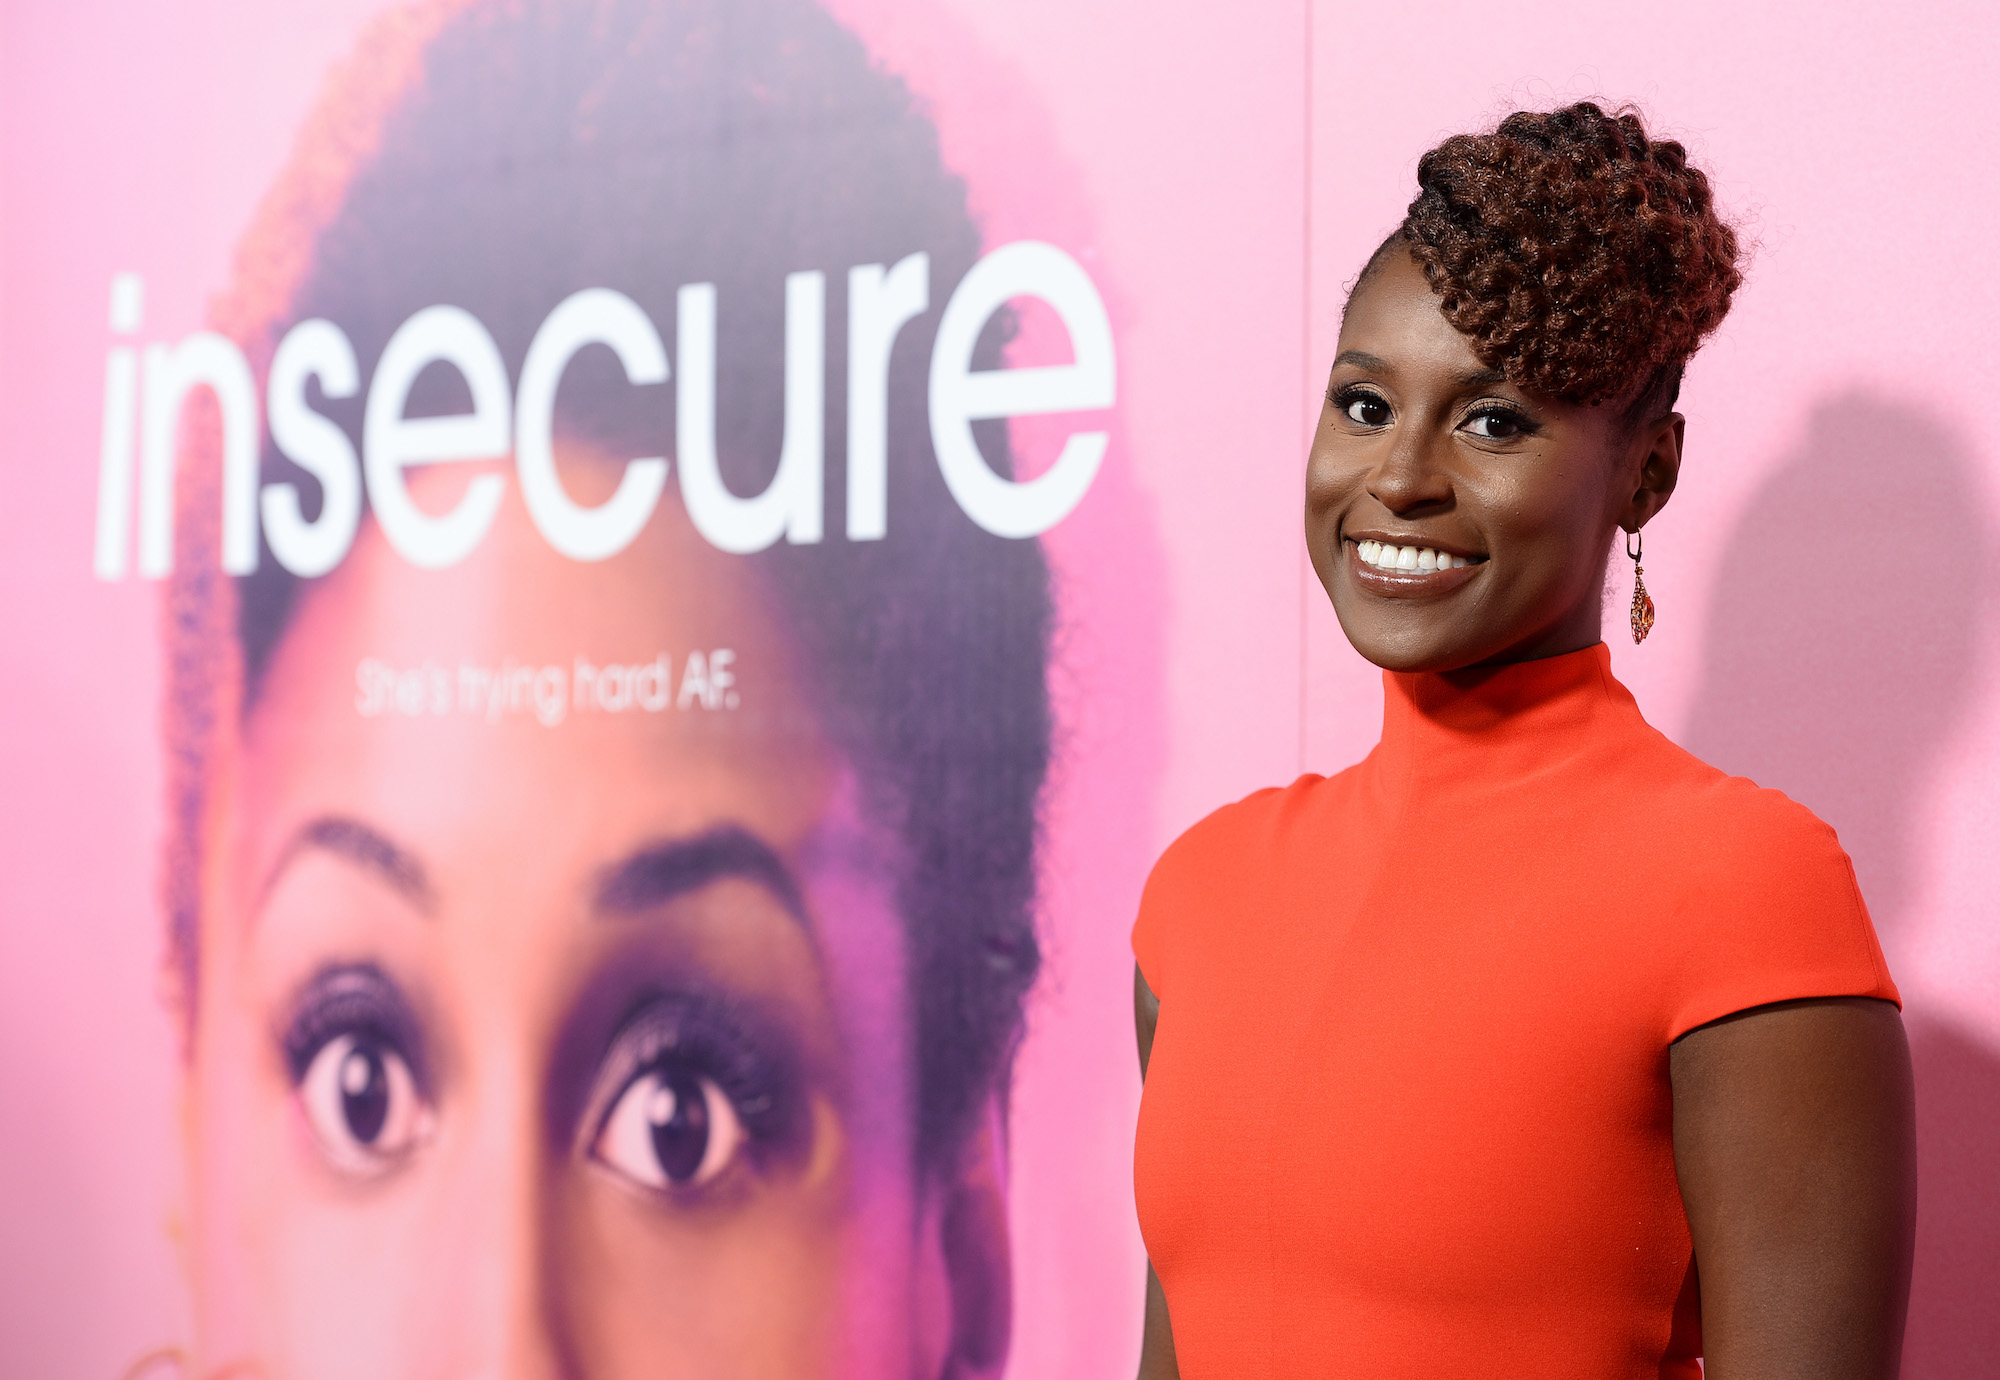 Issa Rae is standing in front of an 'Insecure' poster.